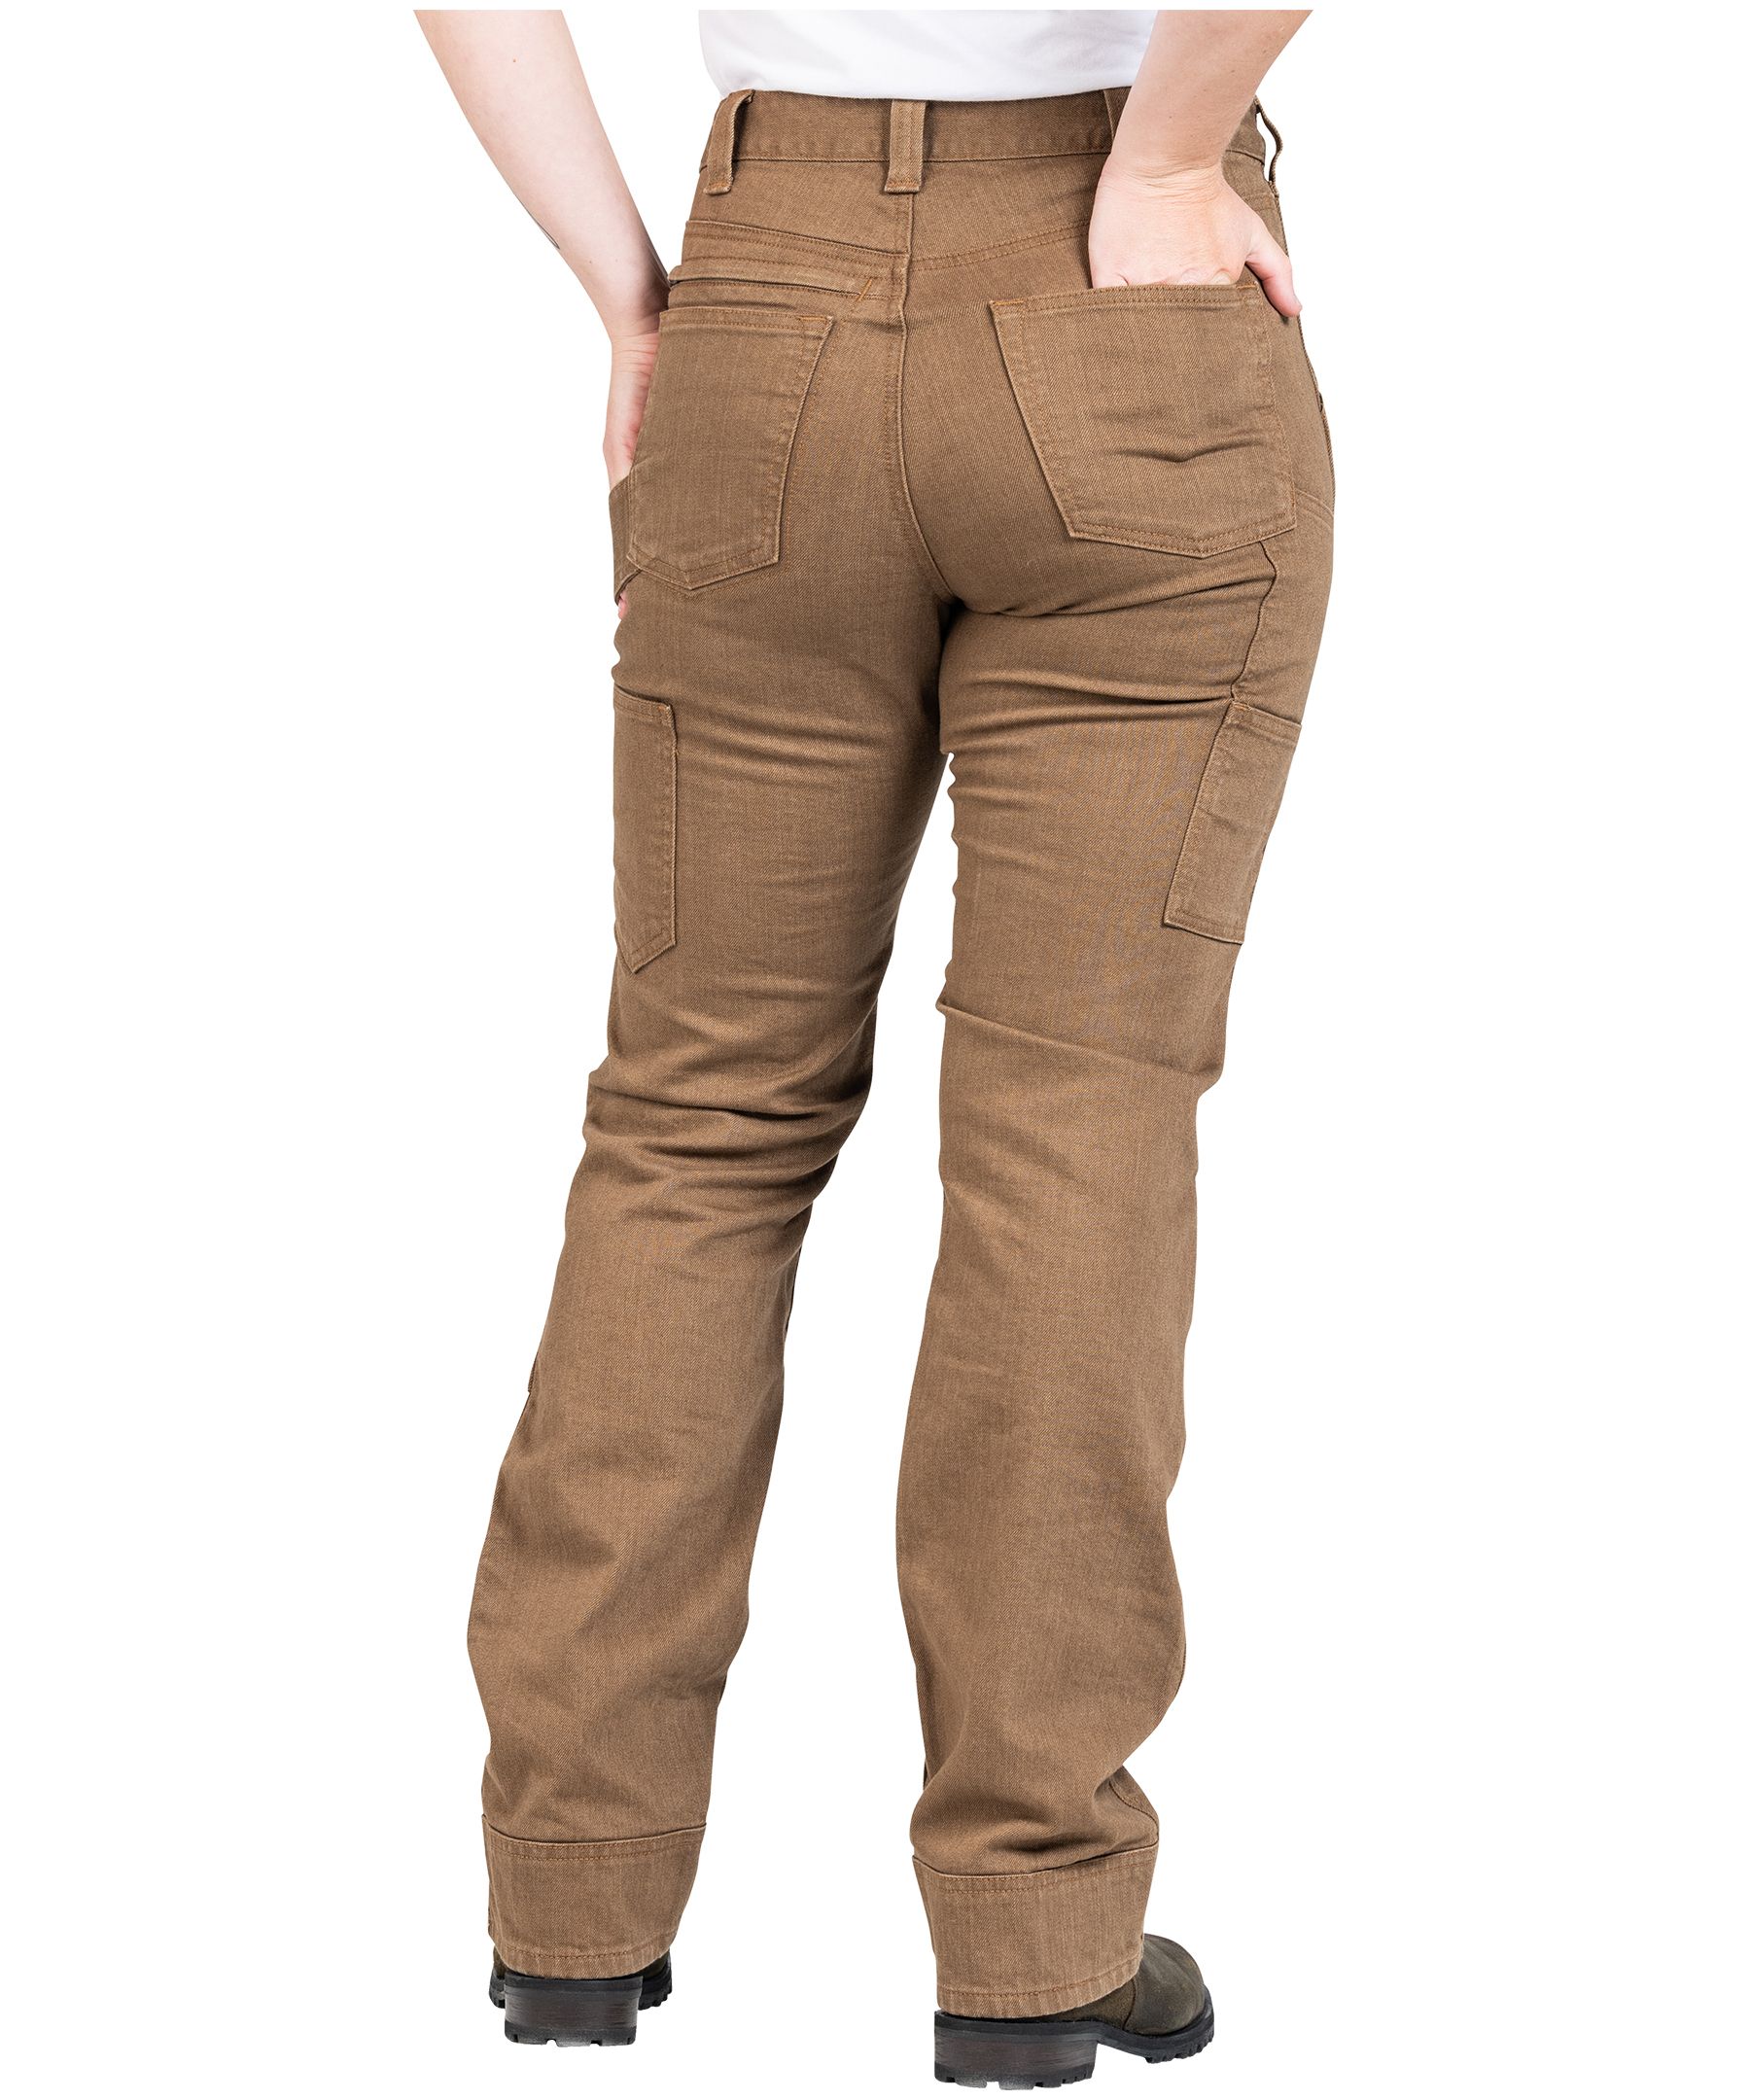 https://media-www.marks.com/product/marks-work-wearhouse/industrial-world/workwear/410037230521/ea-womens-dovetail-old-school-high-rise-pant-cfc9ec4f-ef9c-4ff1-ba6a-275f3e9c2c5f-jpgrendition.jpg?imdensity=1&imwidth=1244&impolicy=mZoom